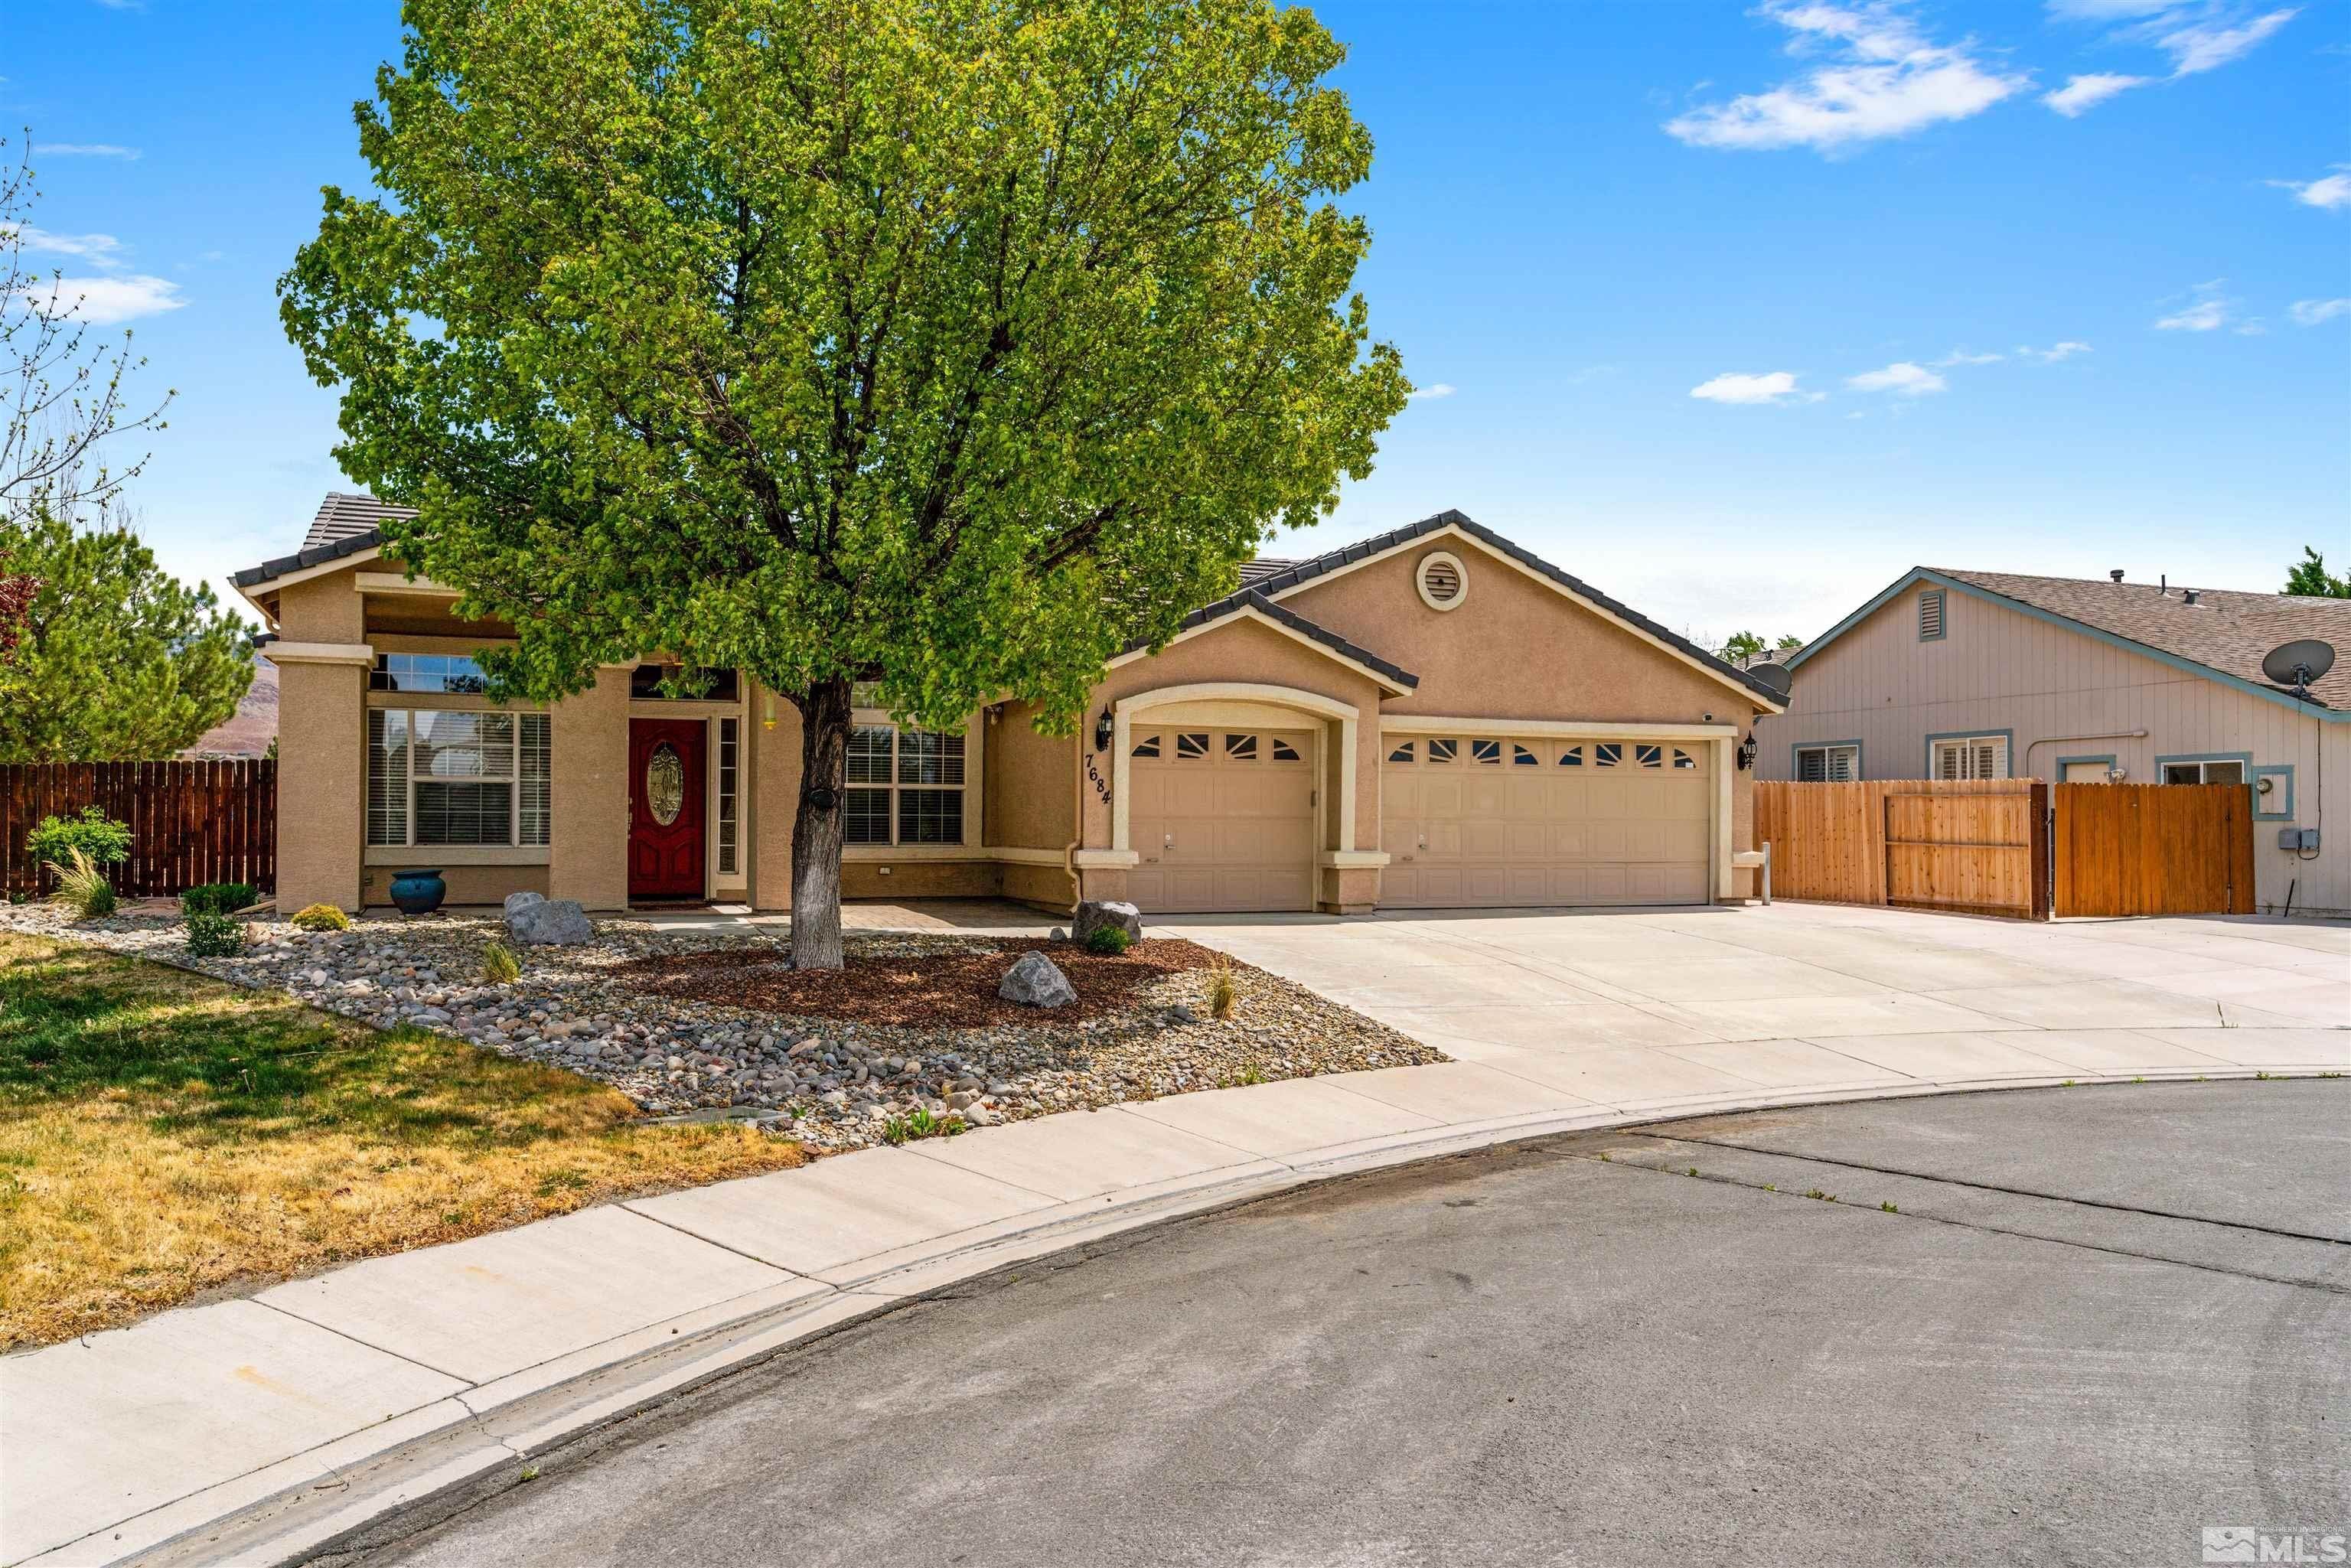 Single Family Homes for Active at 7684 Avila Court Sparks, Nevada 89436 United States